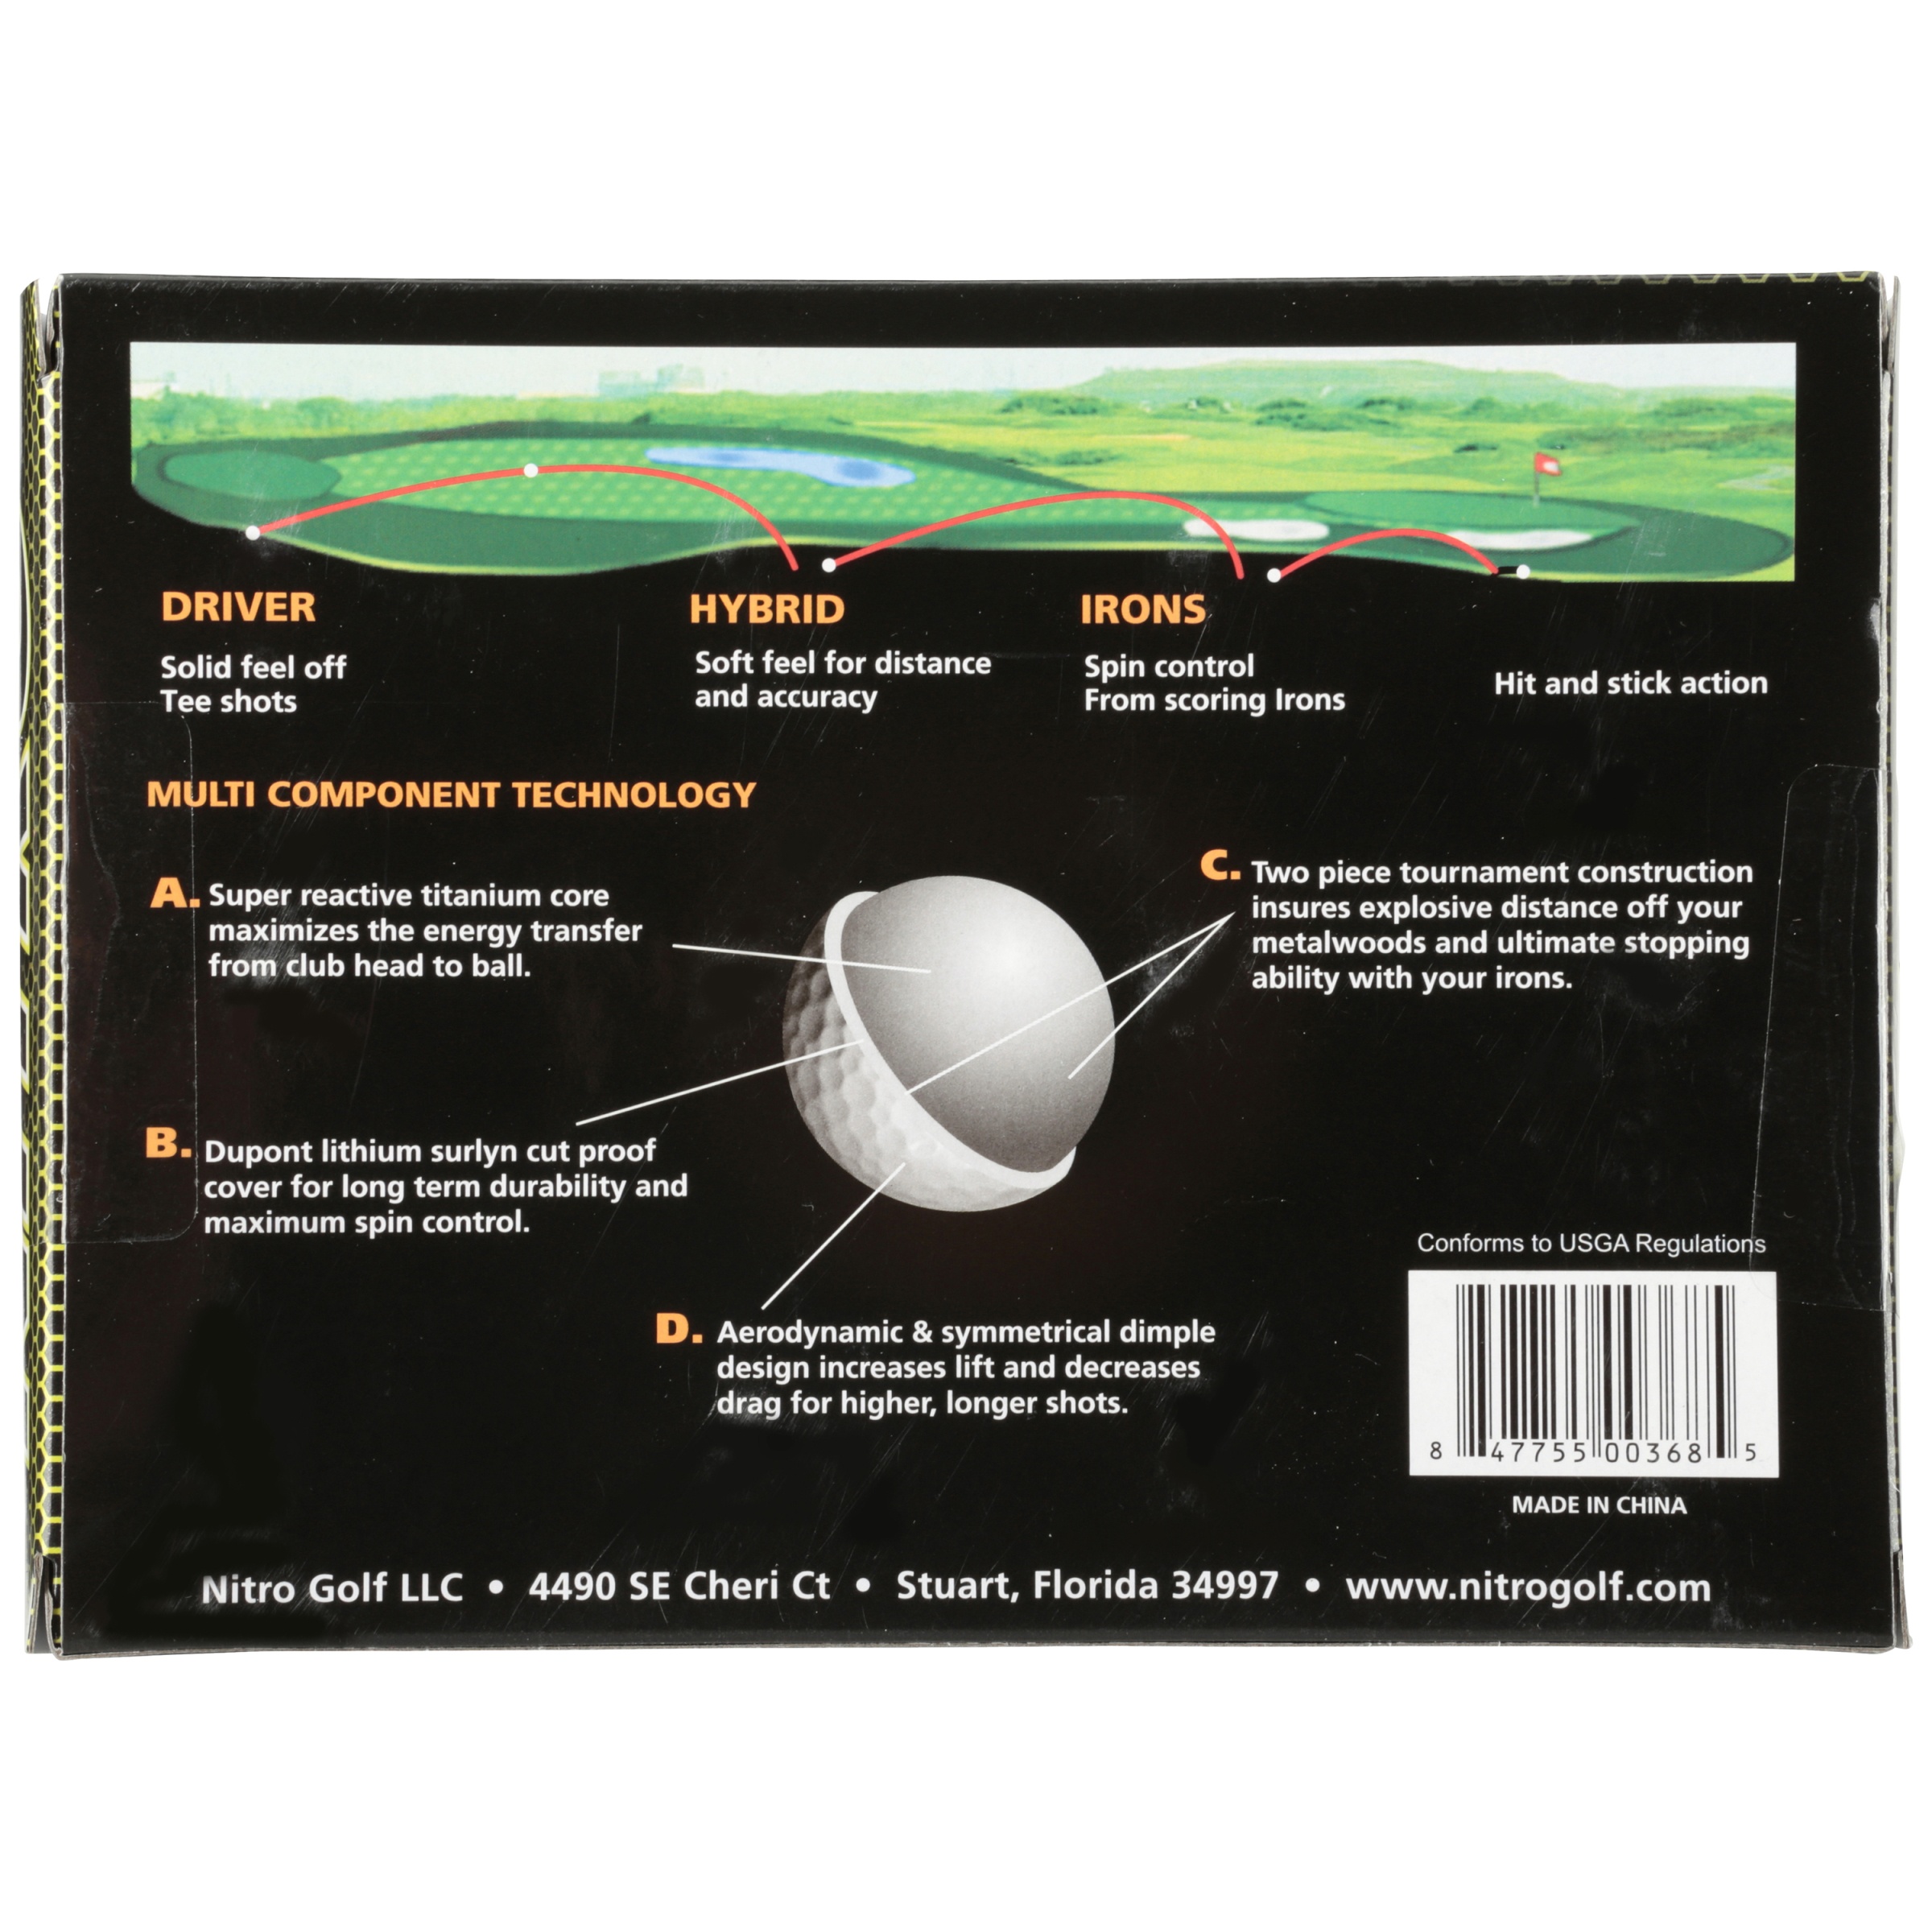 Nitro Golf Ultimate Distance Golf Balls, Yellow, 12 Pack - image 2 of 9